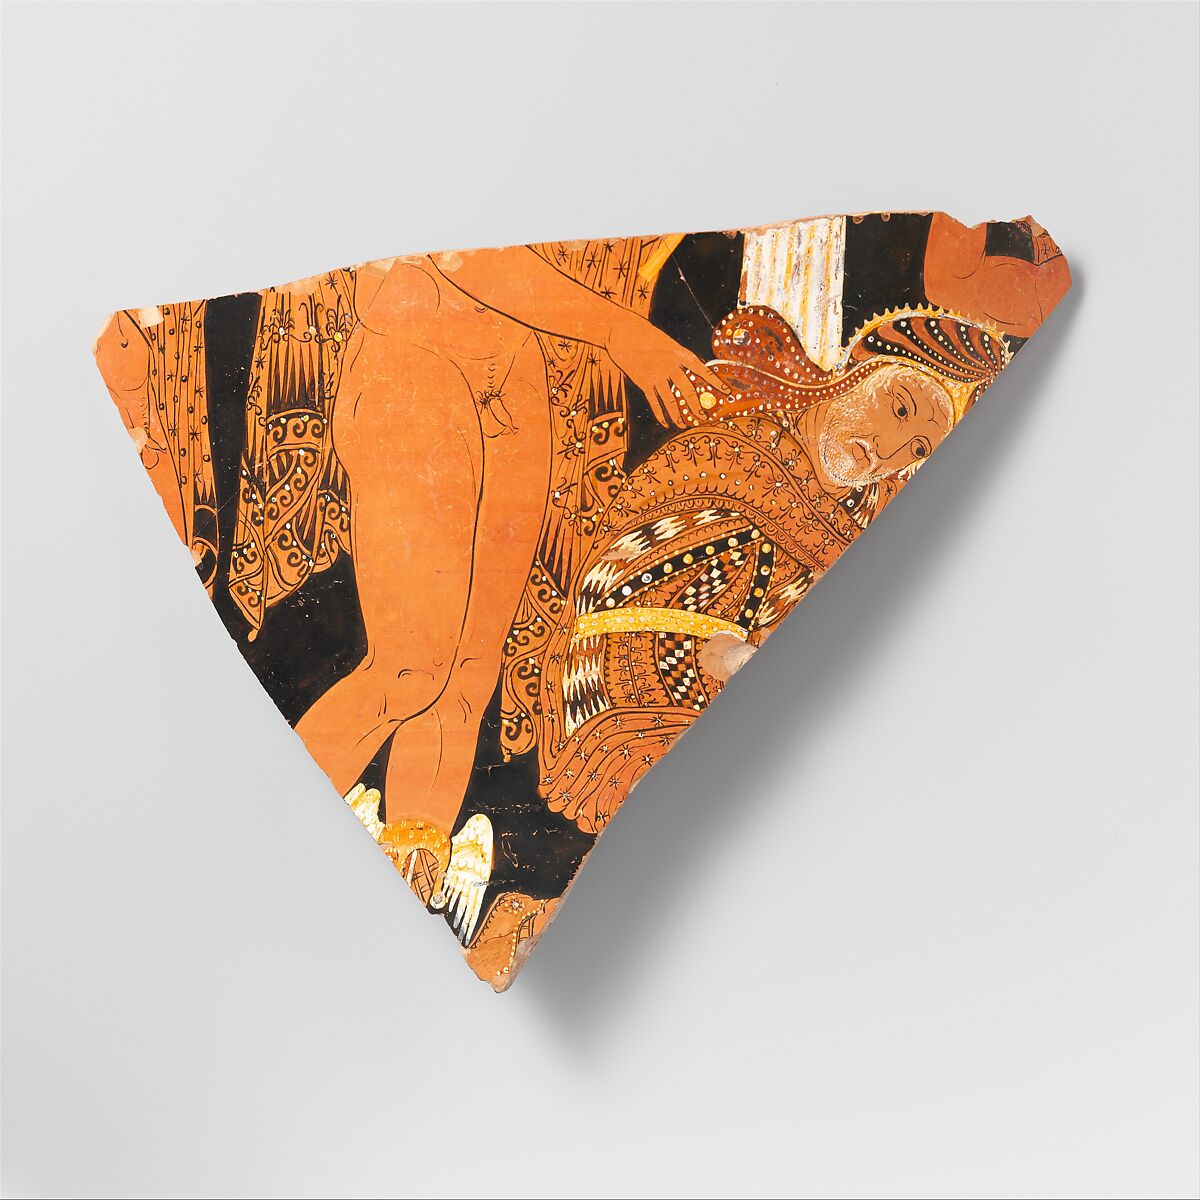 Fragment of a terracotta calyx-krater (mixing bowl), Attributed to the Black Fury Painter, Terracotta, Greek, South Italian, Apulian 